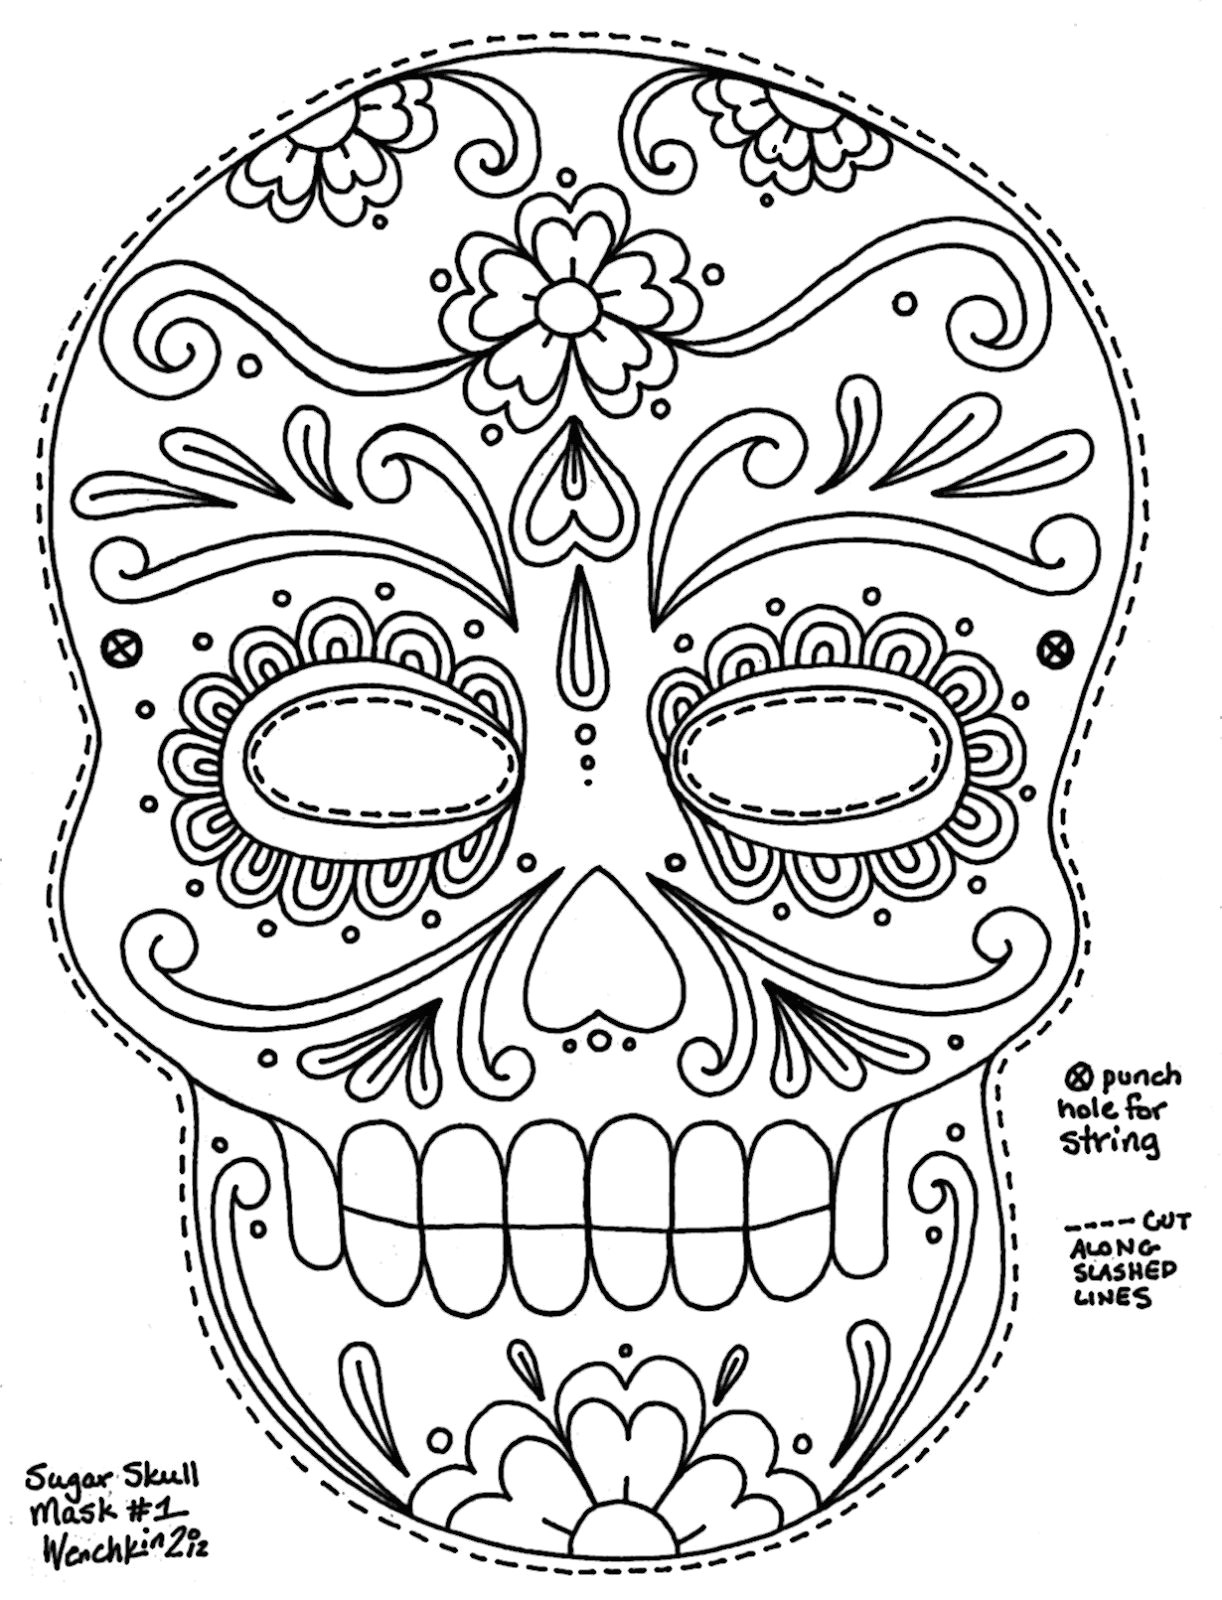 Day Of the Dead Drawing Ideas Yucca Flats N M Wenchkin S Coloring Pages Sugar Skull